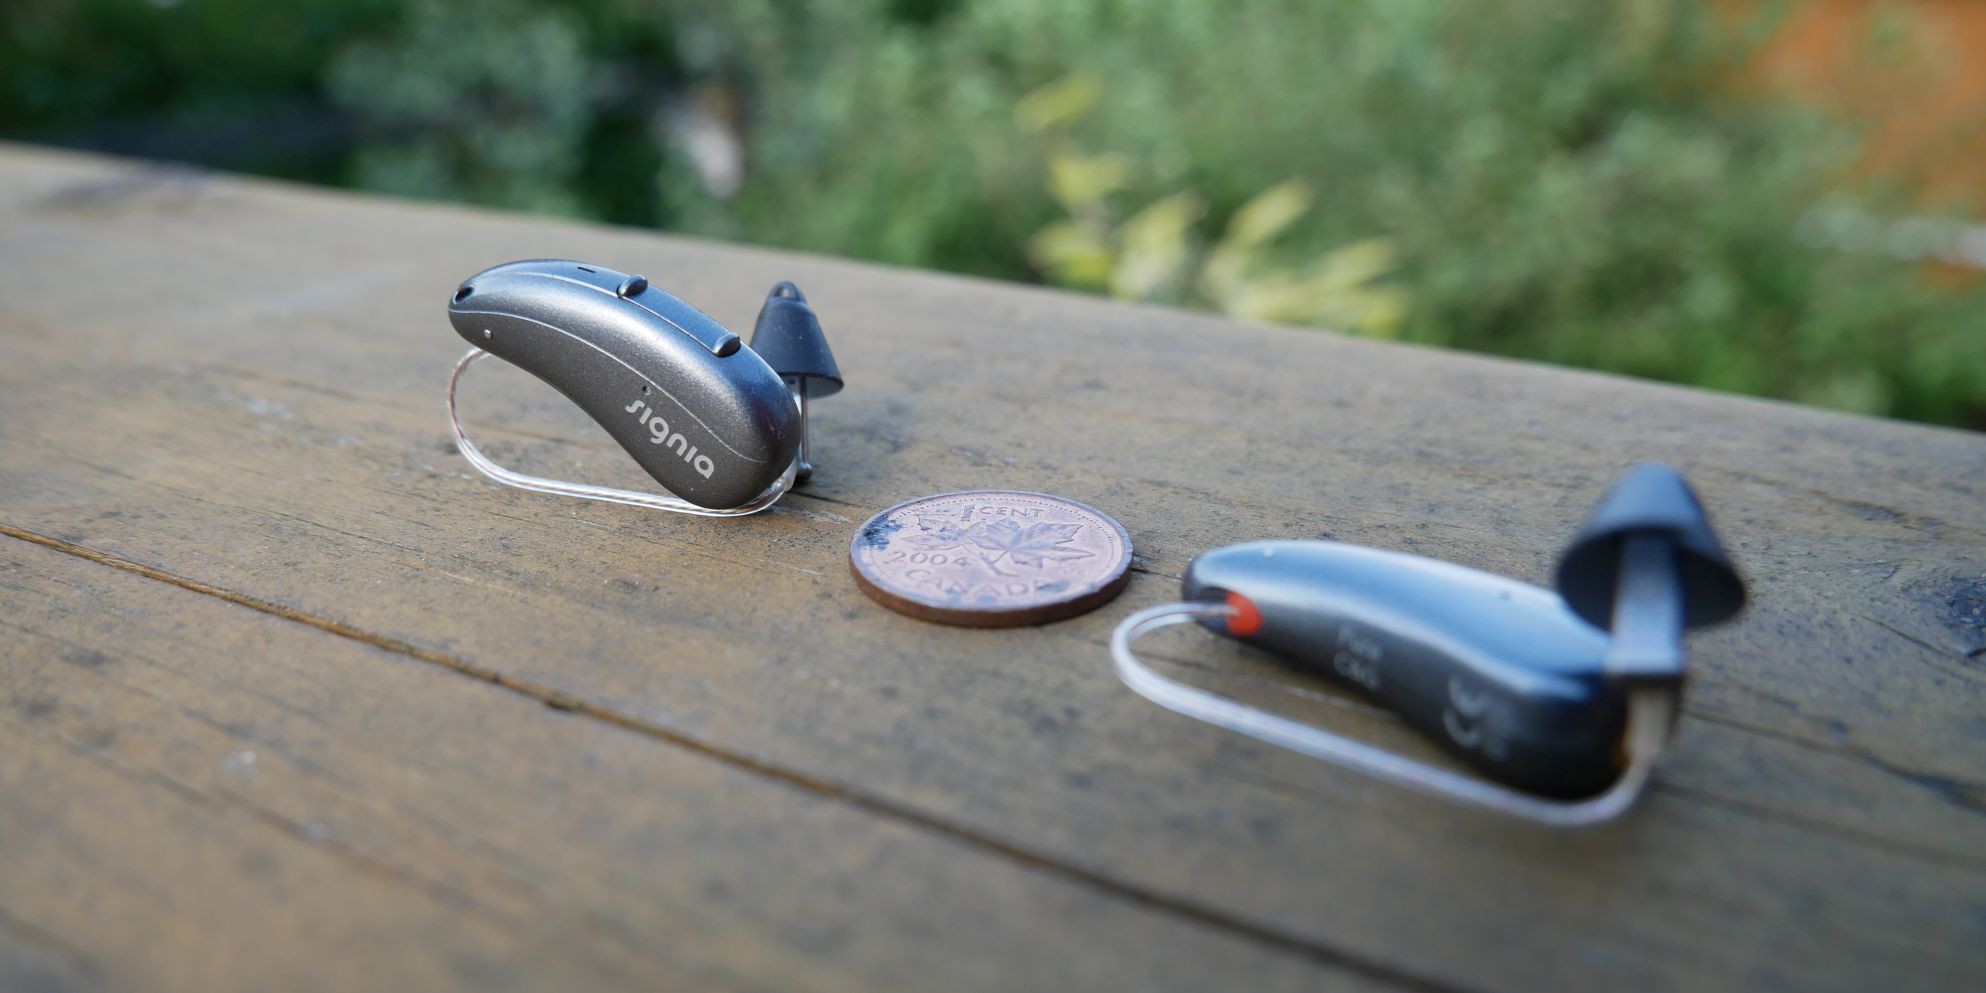 Signia Pure Charge&Go AX hearing aids with penny for size reference.